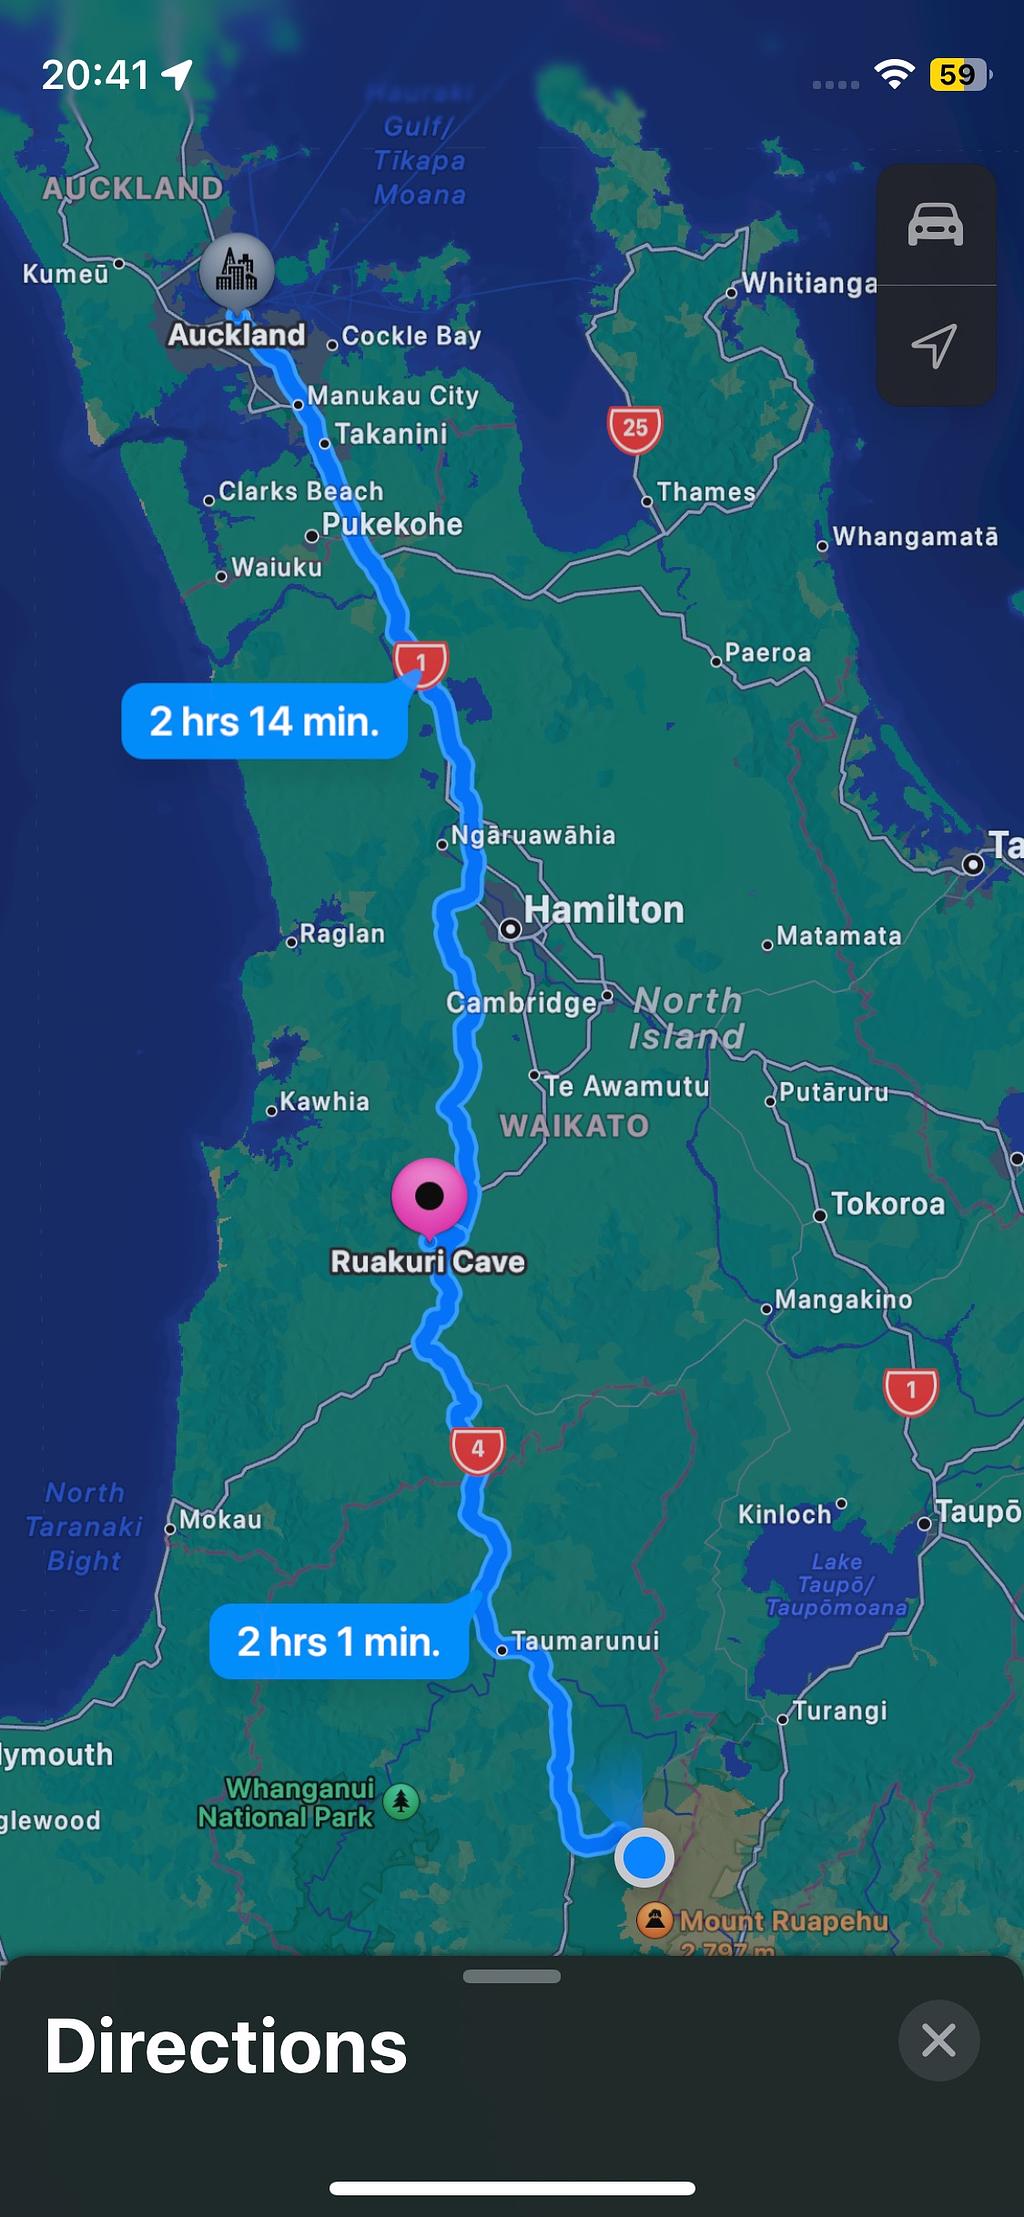 A screenshot of Apple Maps showing directions from Auckland to Tongariro National Park